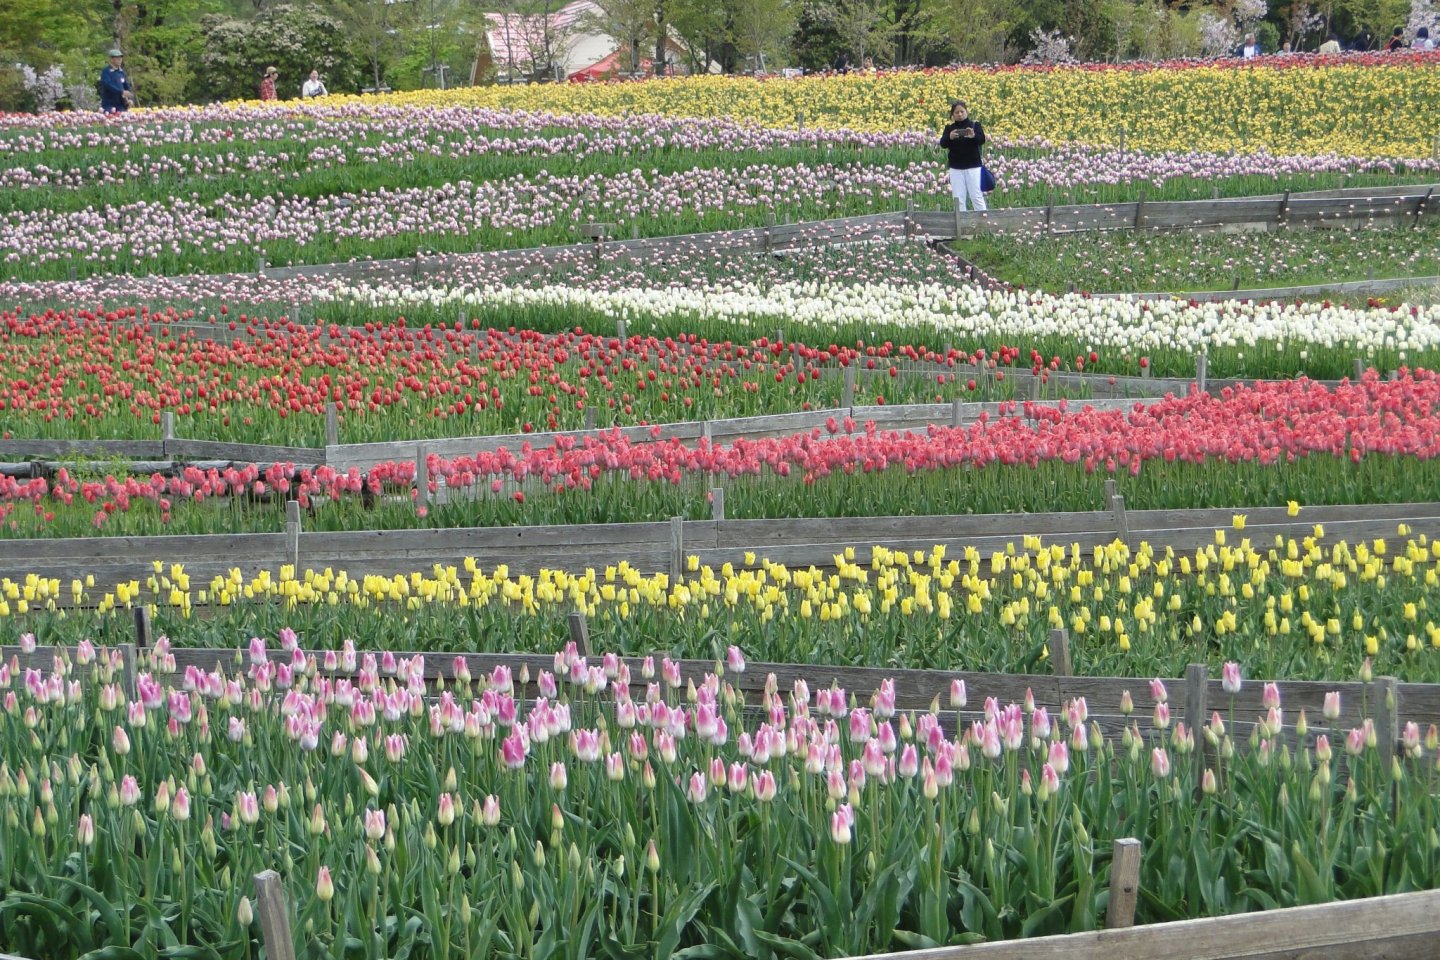 Rows and rows of tulips!